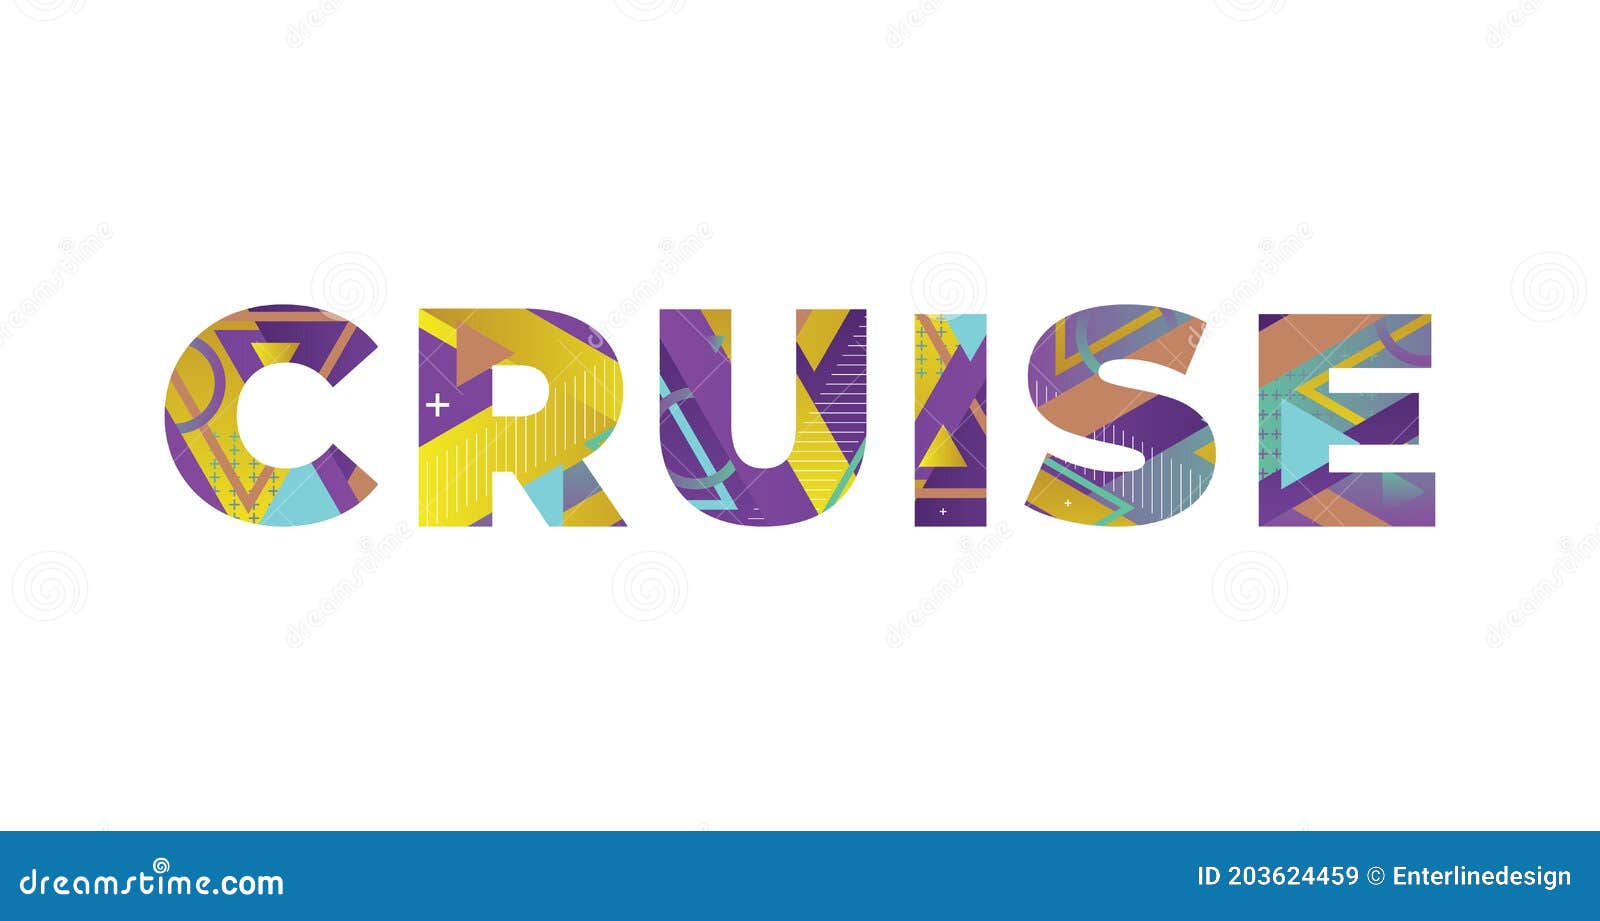 cruise themed words